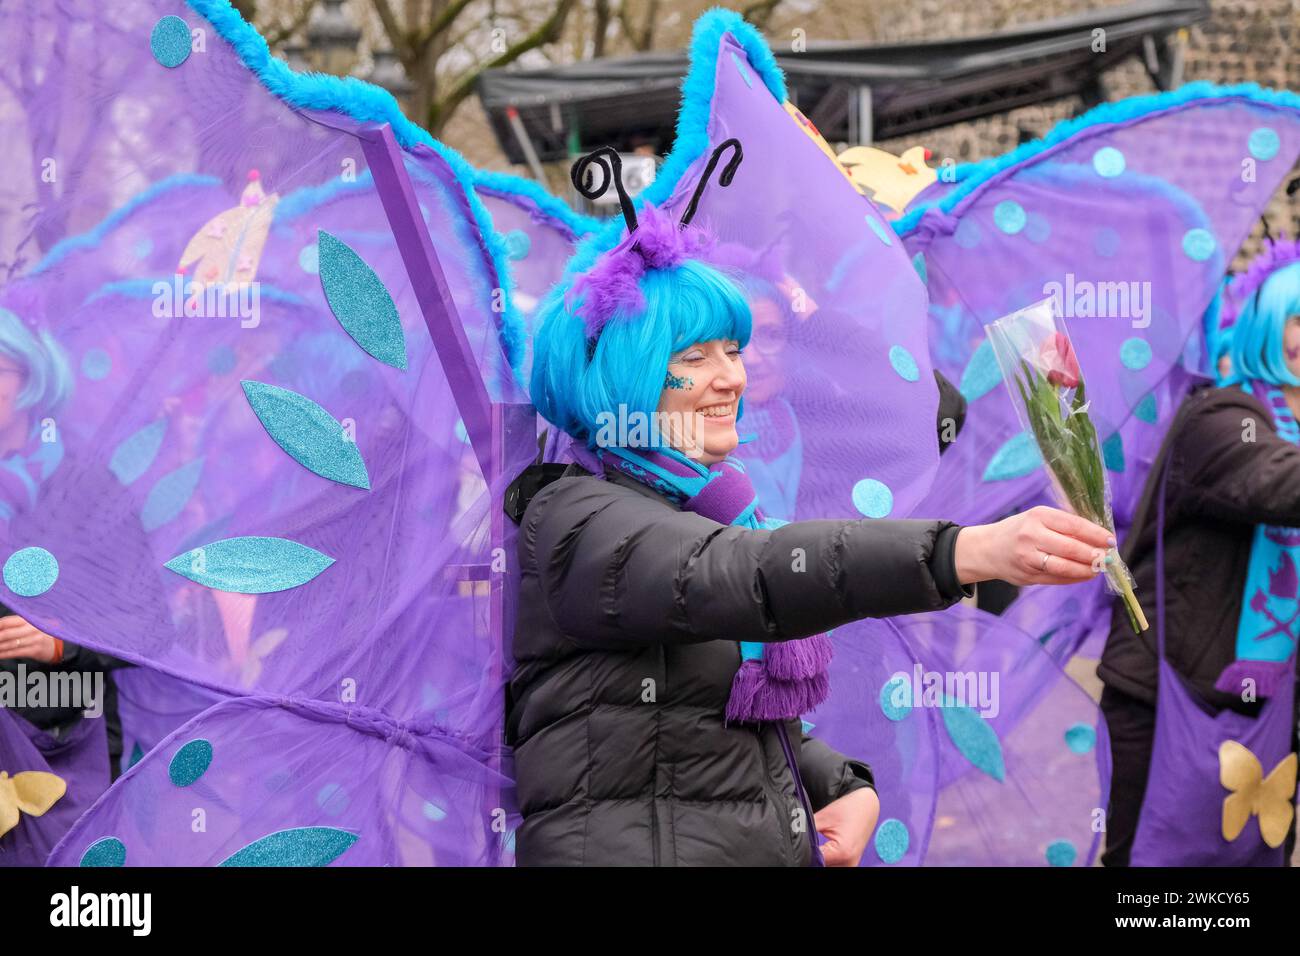 Cologne, Germany - February 11, 2024  Funny Street musicians in colorful clothes celebrating the women's carnival, Rosenmontag Parade( the rose monday. Stock Photo